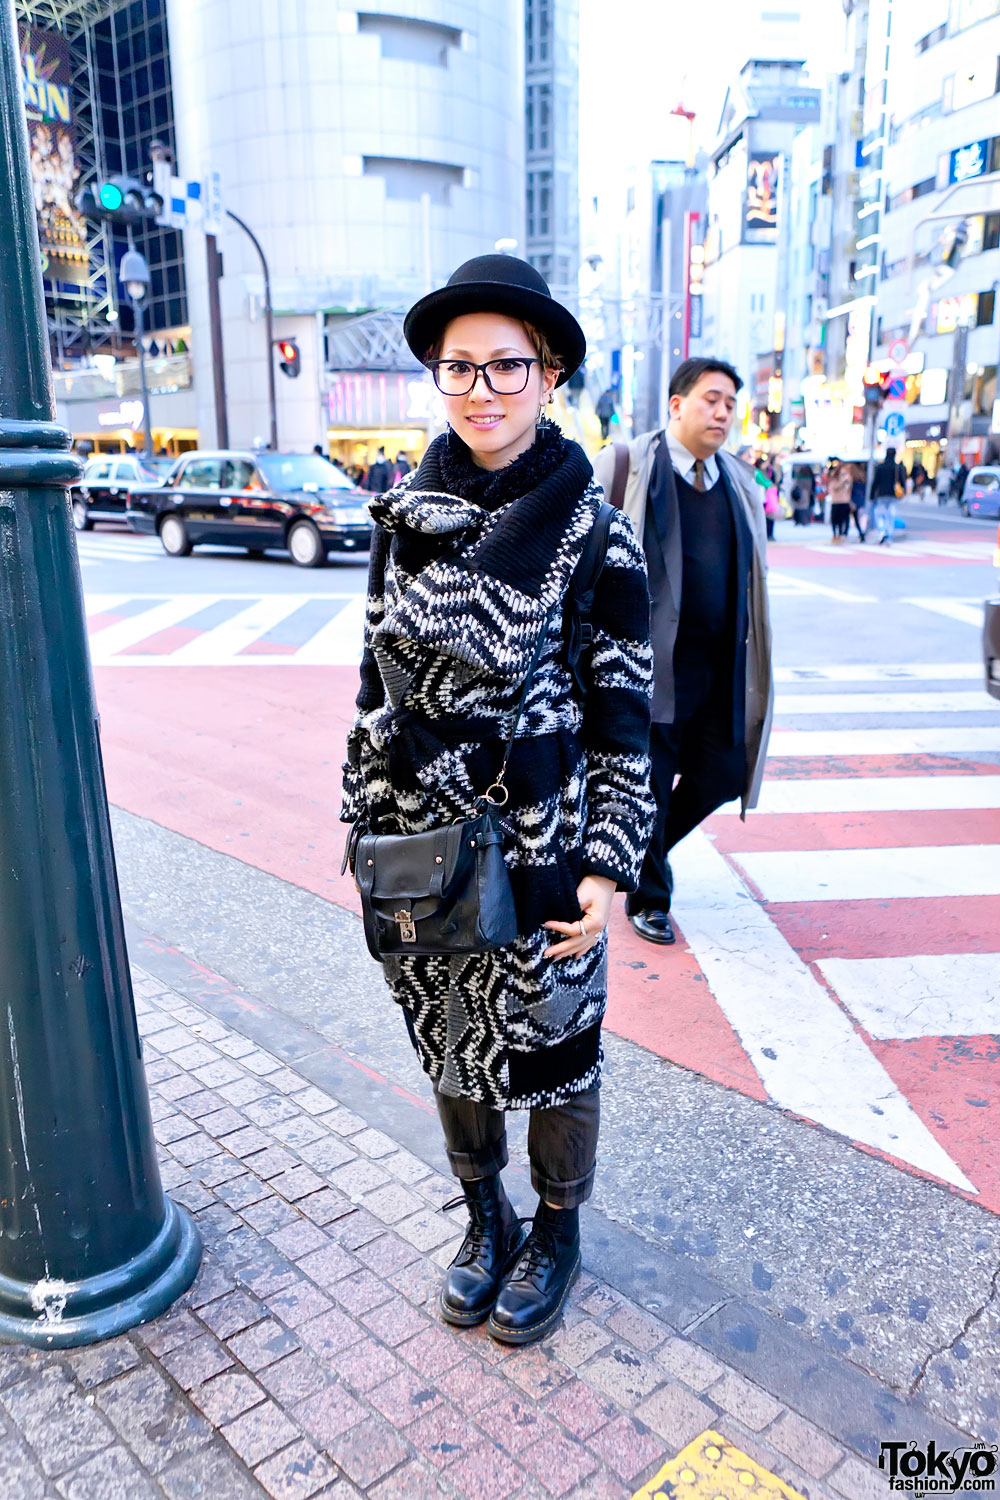 Shibuya Girl in Glasses, Bowler Hat, Long Knit Sweater & Boots